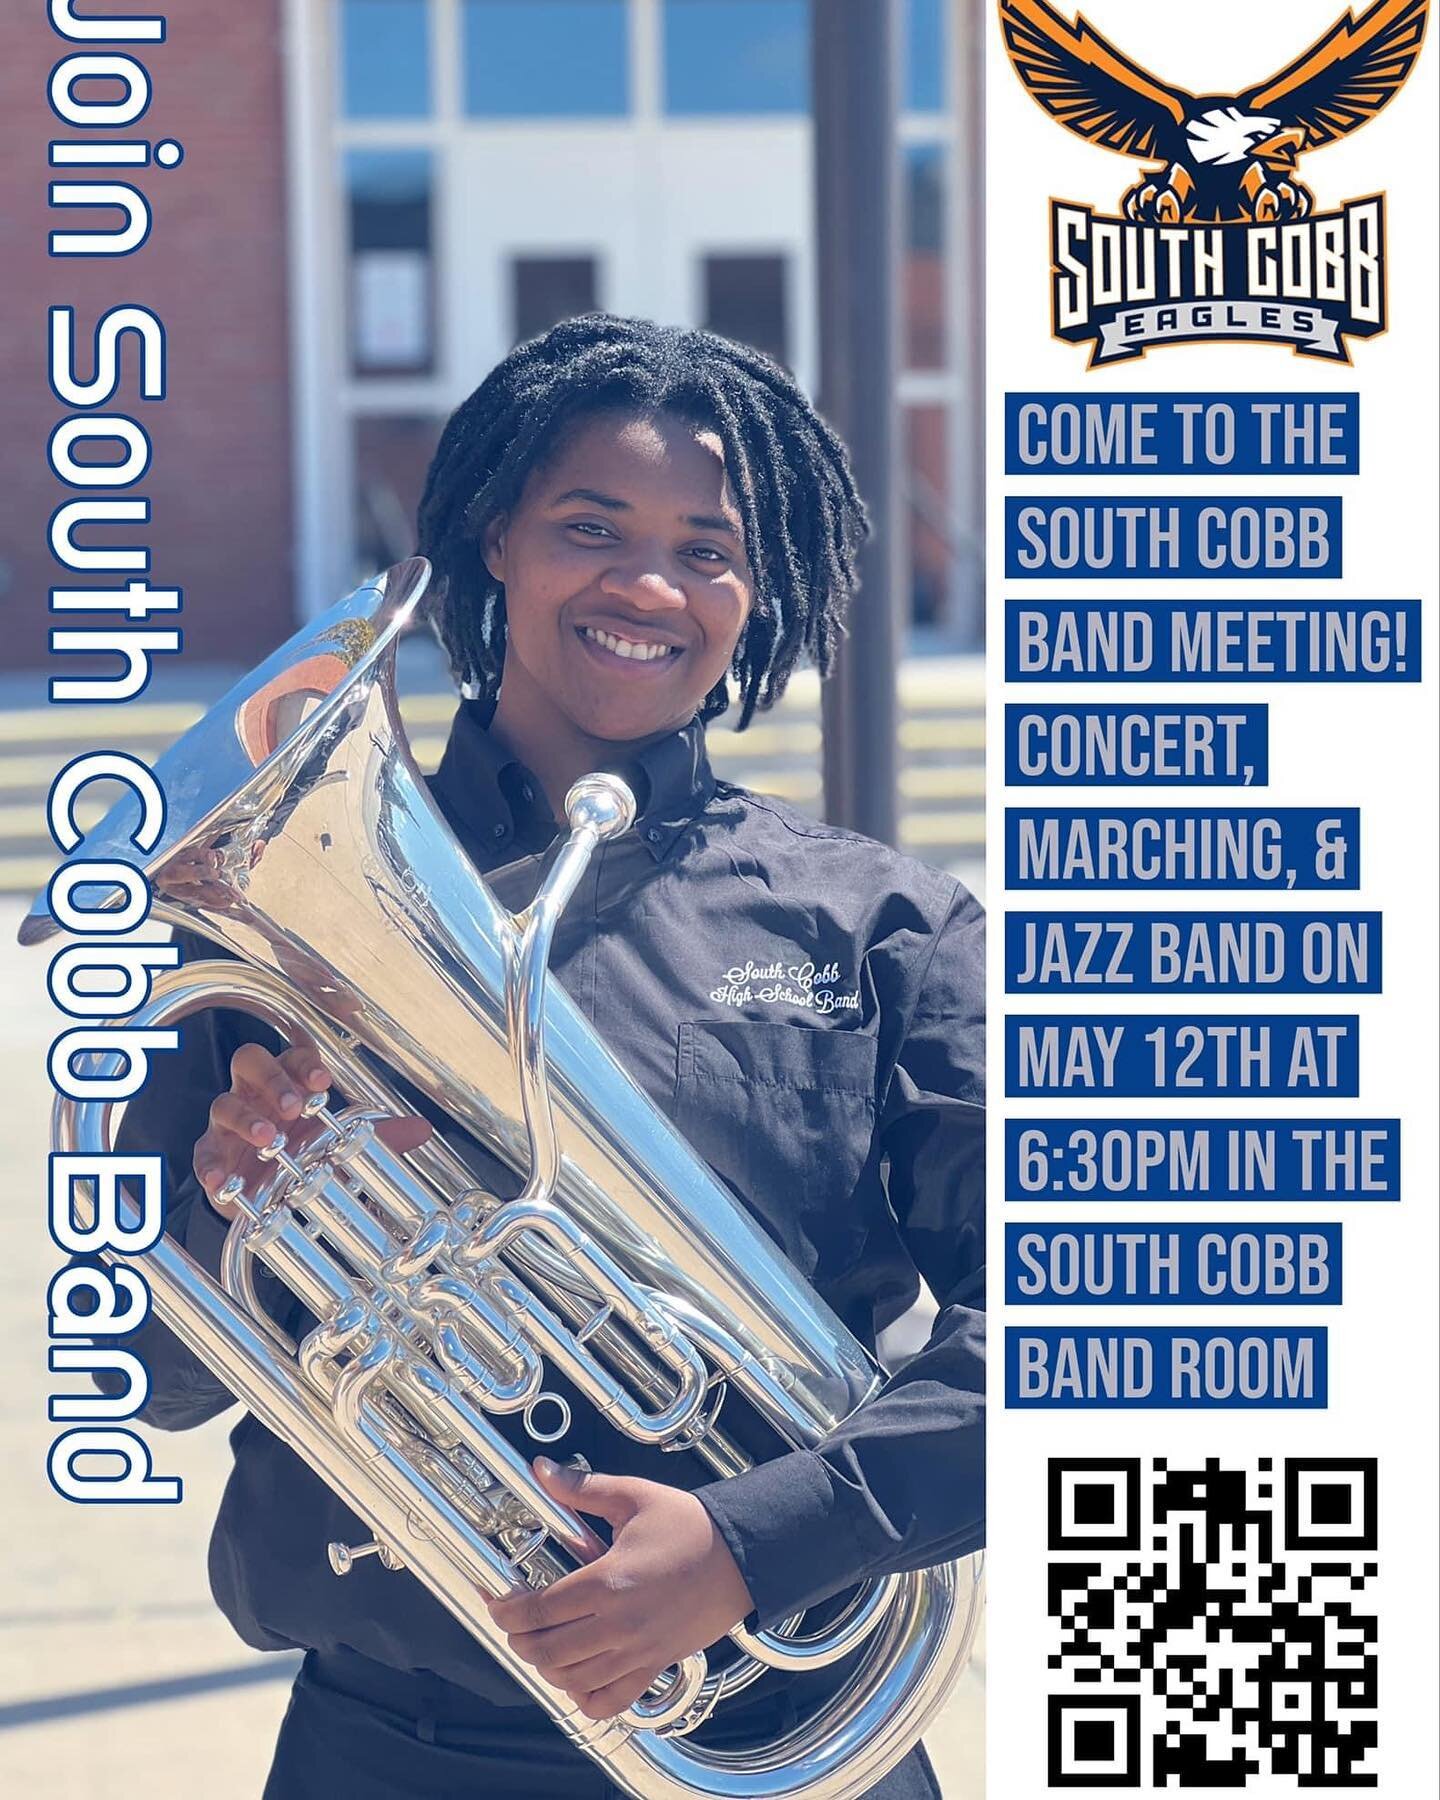 Join the South Cobb Band! Informational meeting May 12, 2022 at 6:30pm in the Band Room!